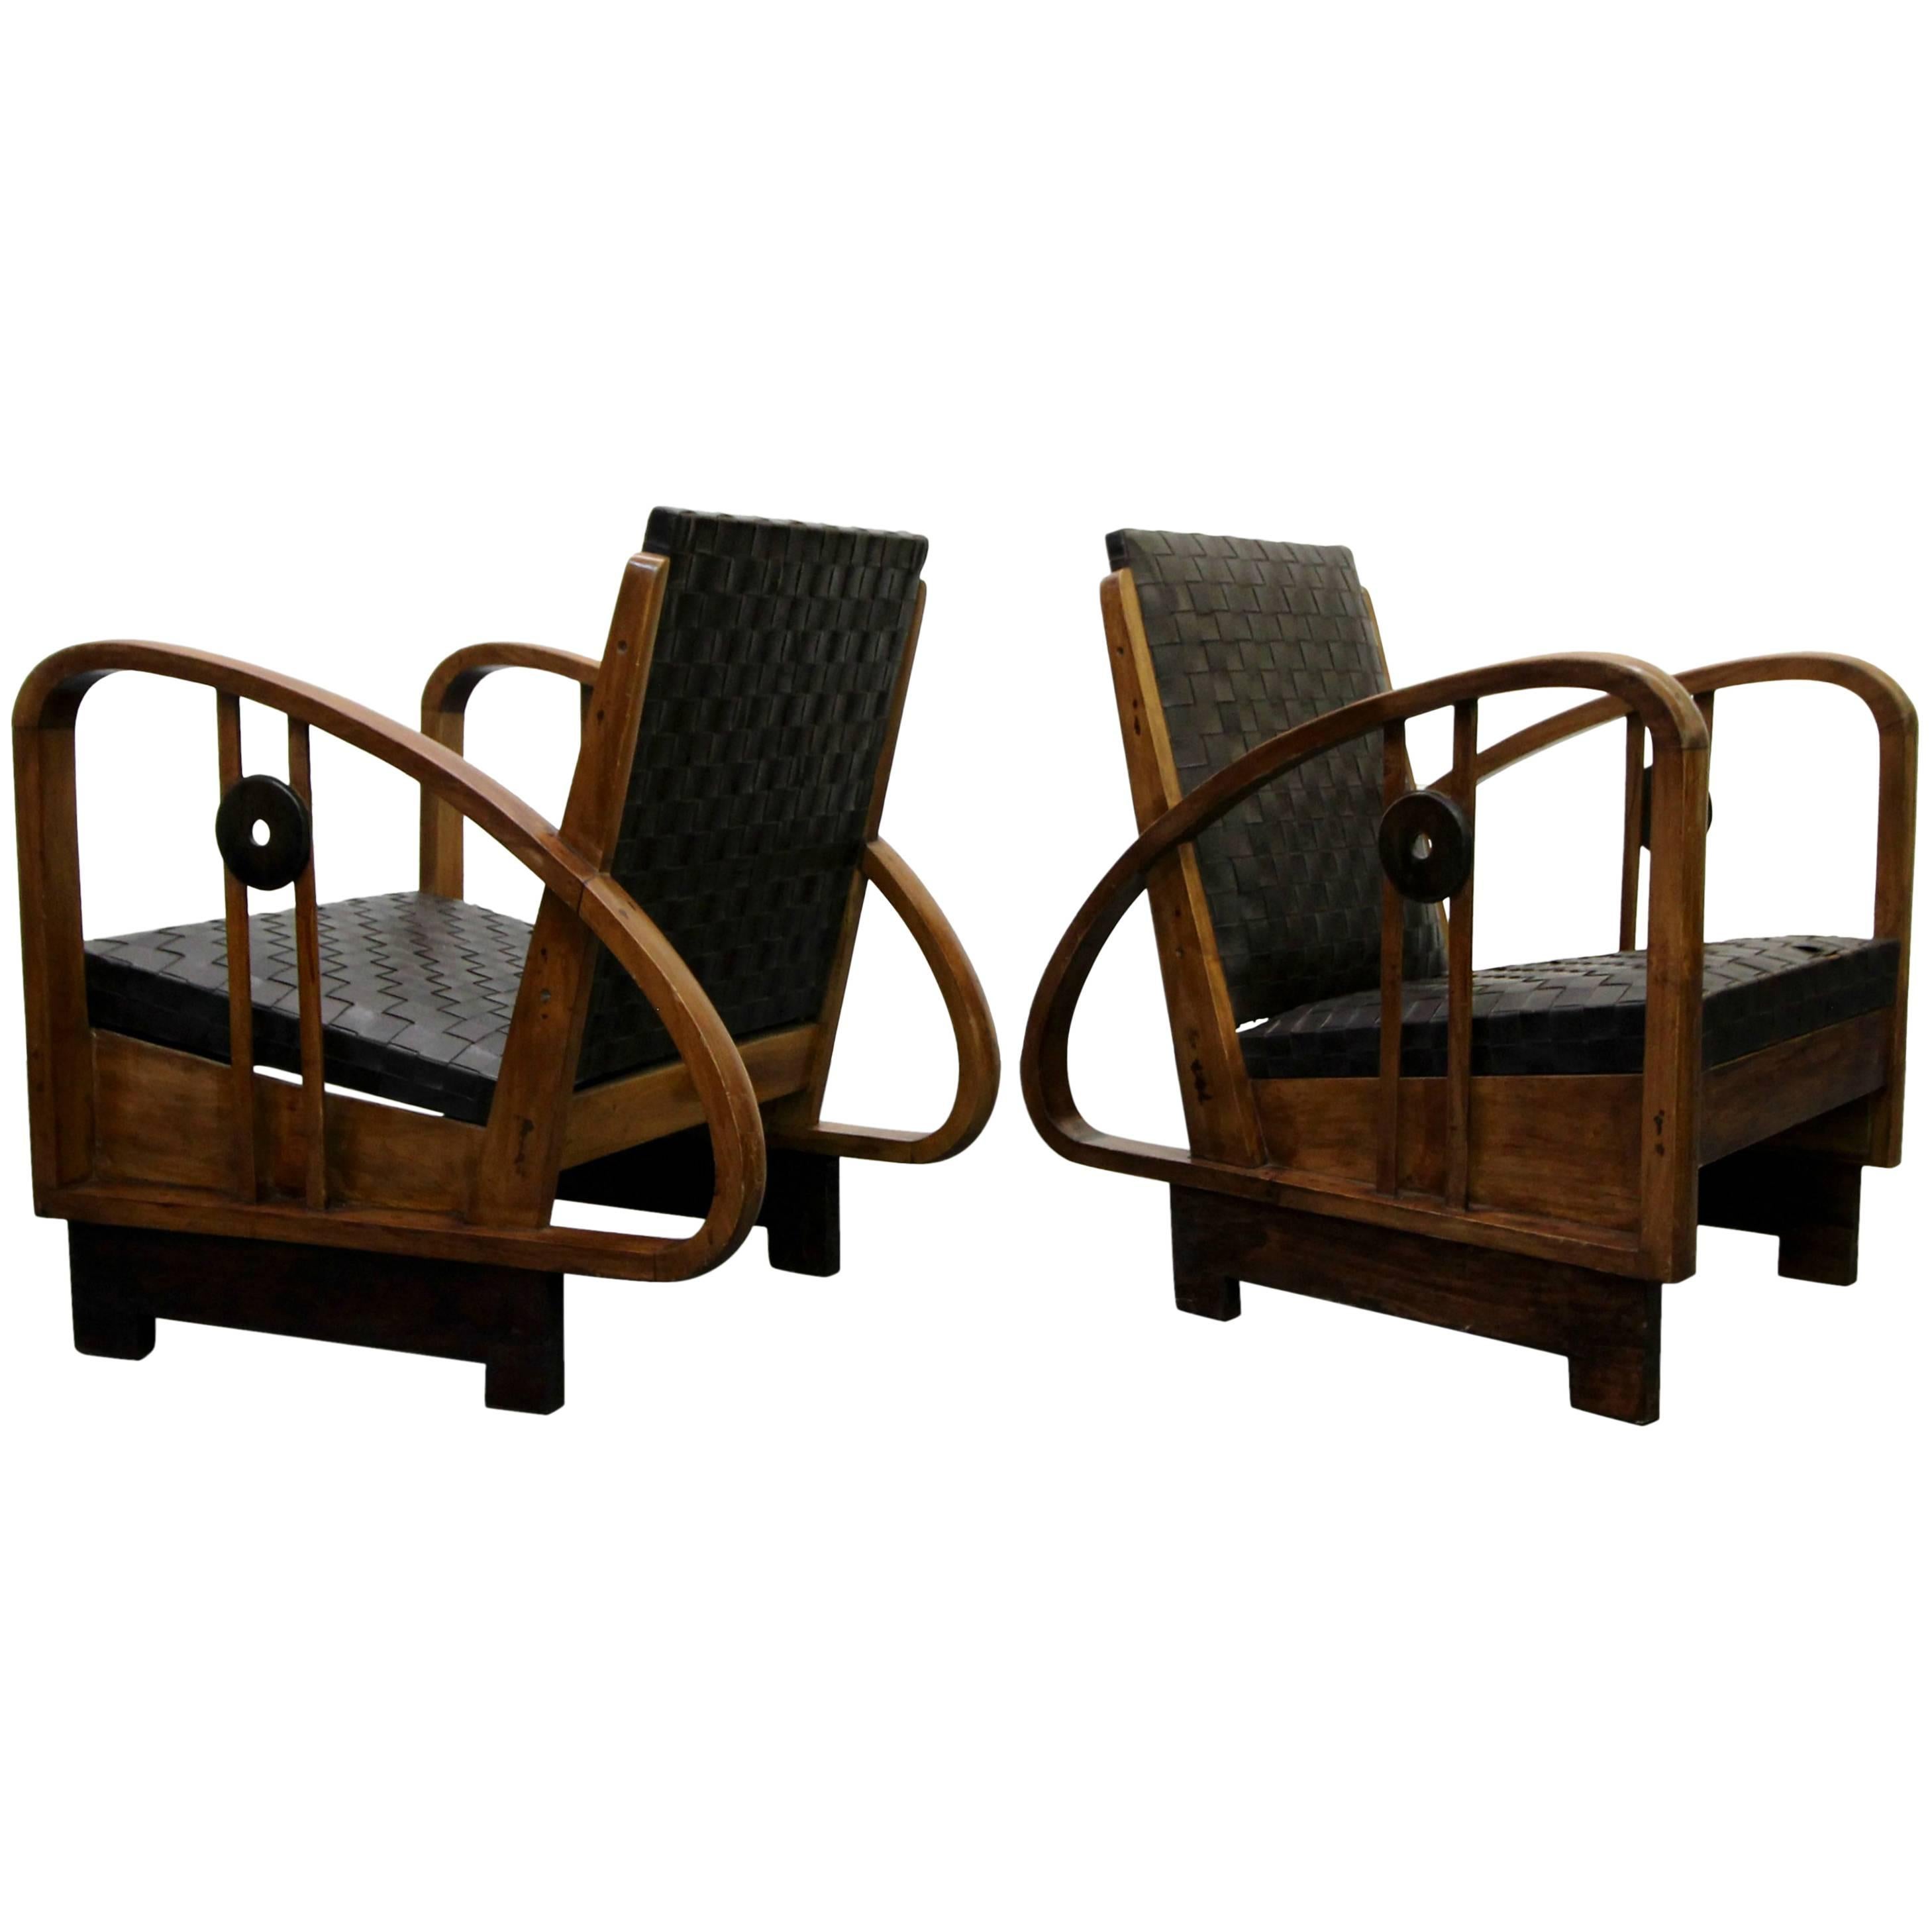 Pair of Antique French Art Deco Bentwood Lounge Chairs with Woven Leather